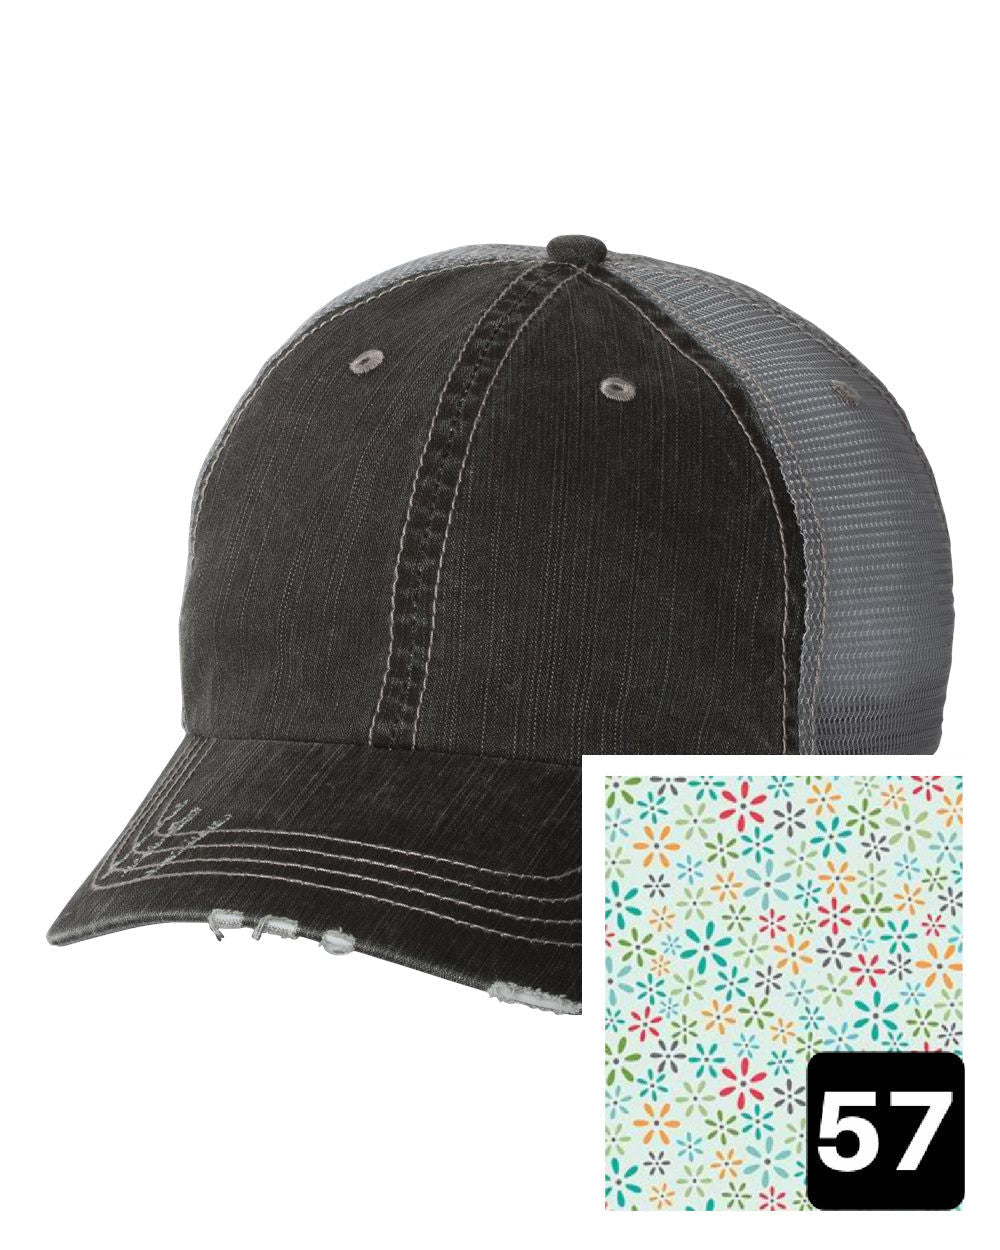 gray distressed trucker hat with white daisy on yellow fabric state of Michigan